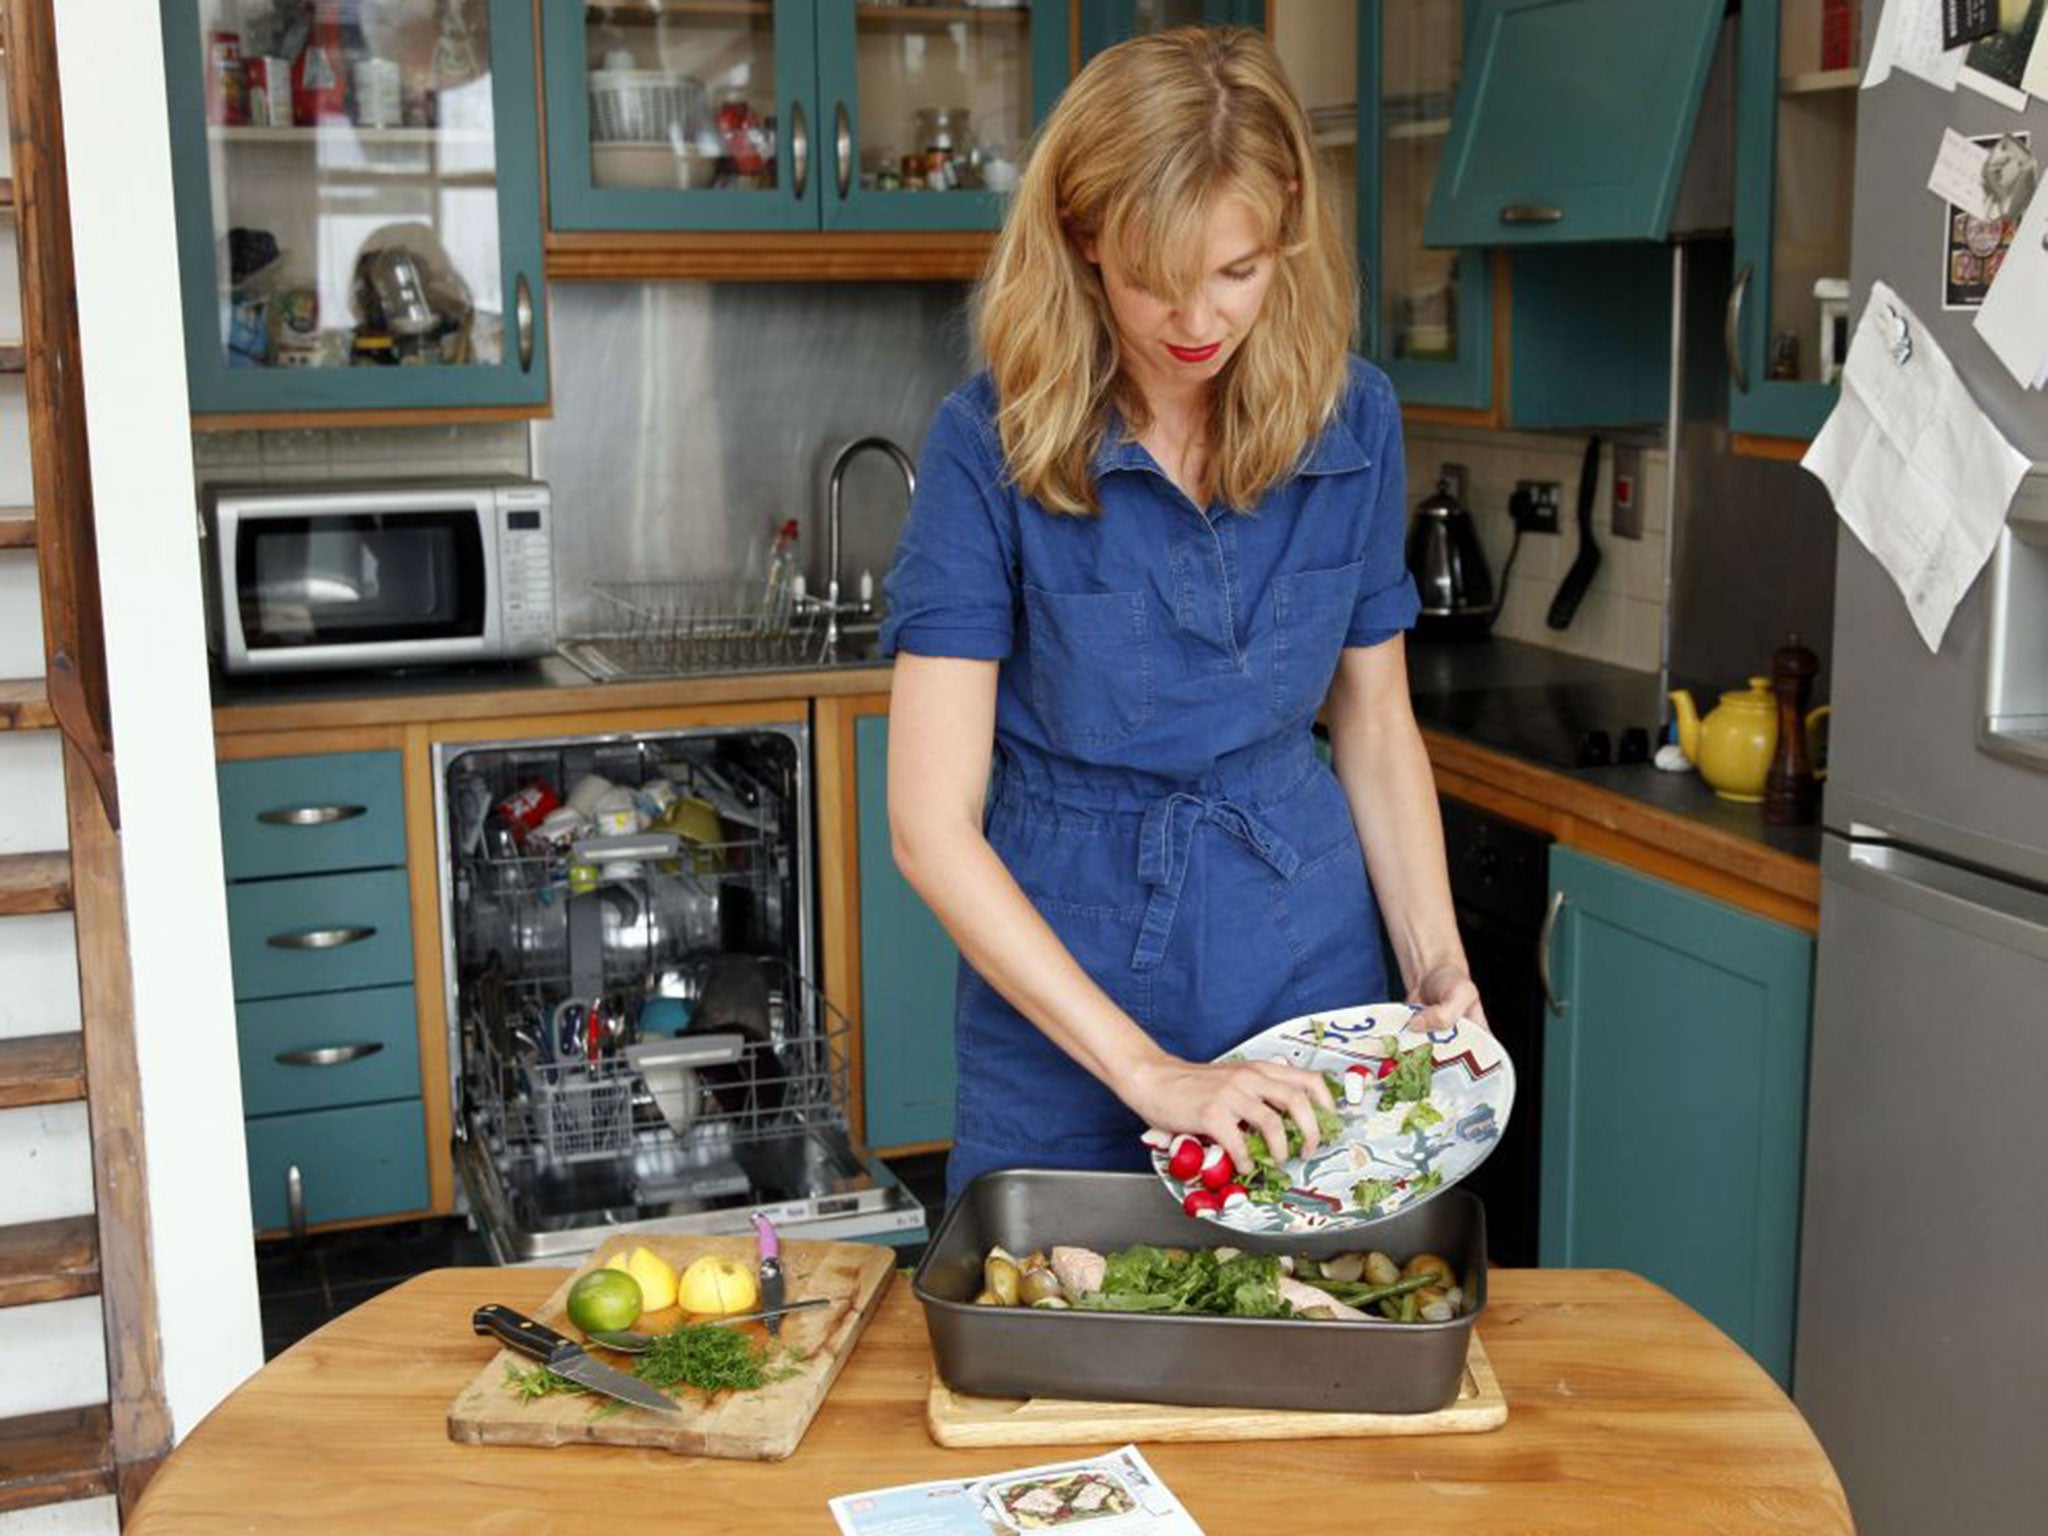 Ready meal: Kate Wills finds midweek dining inspiration comes in boxes